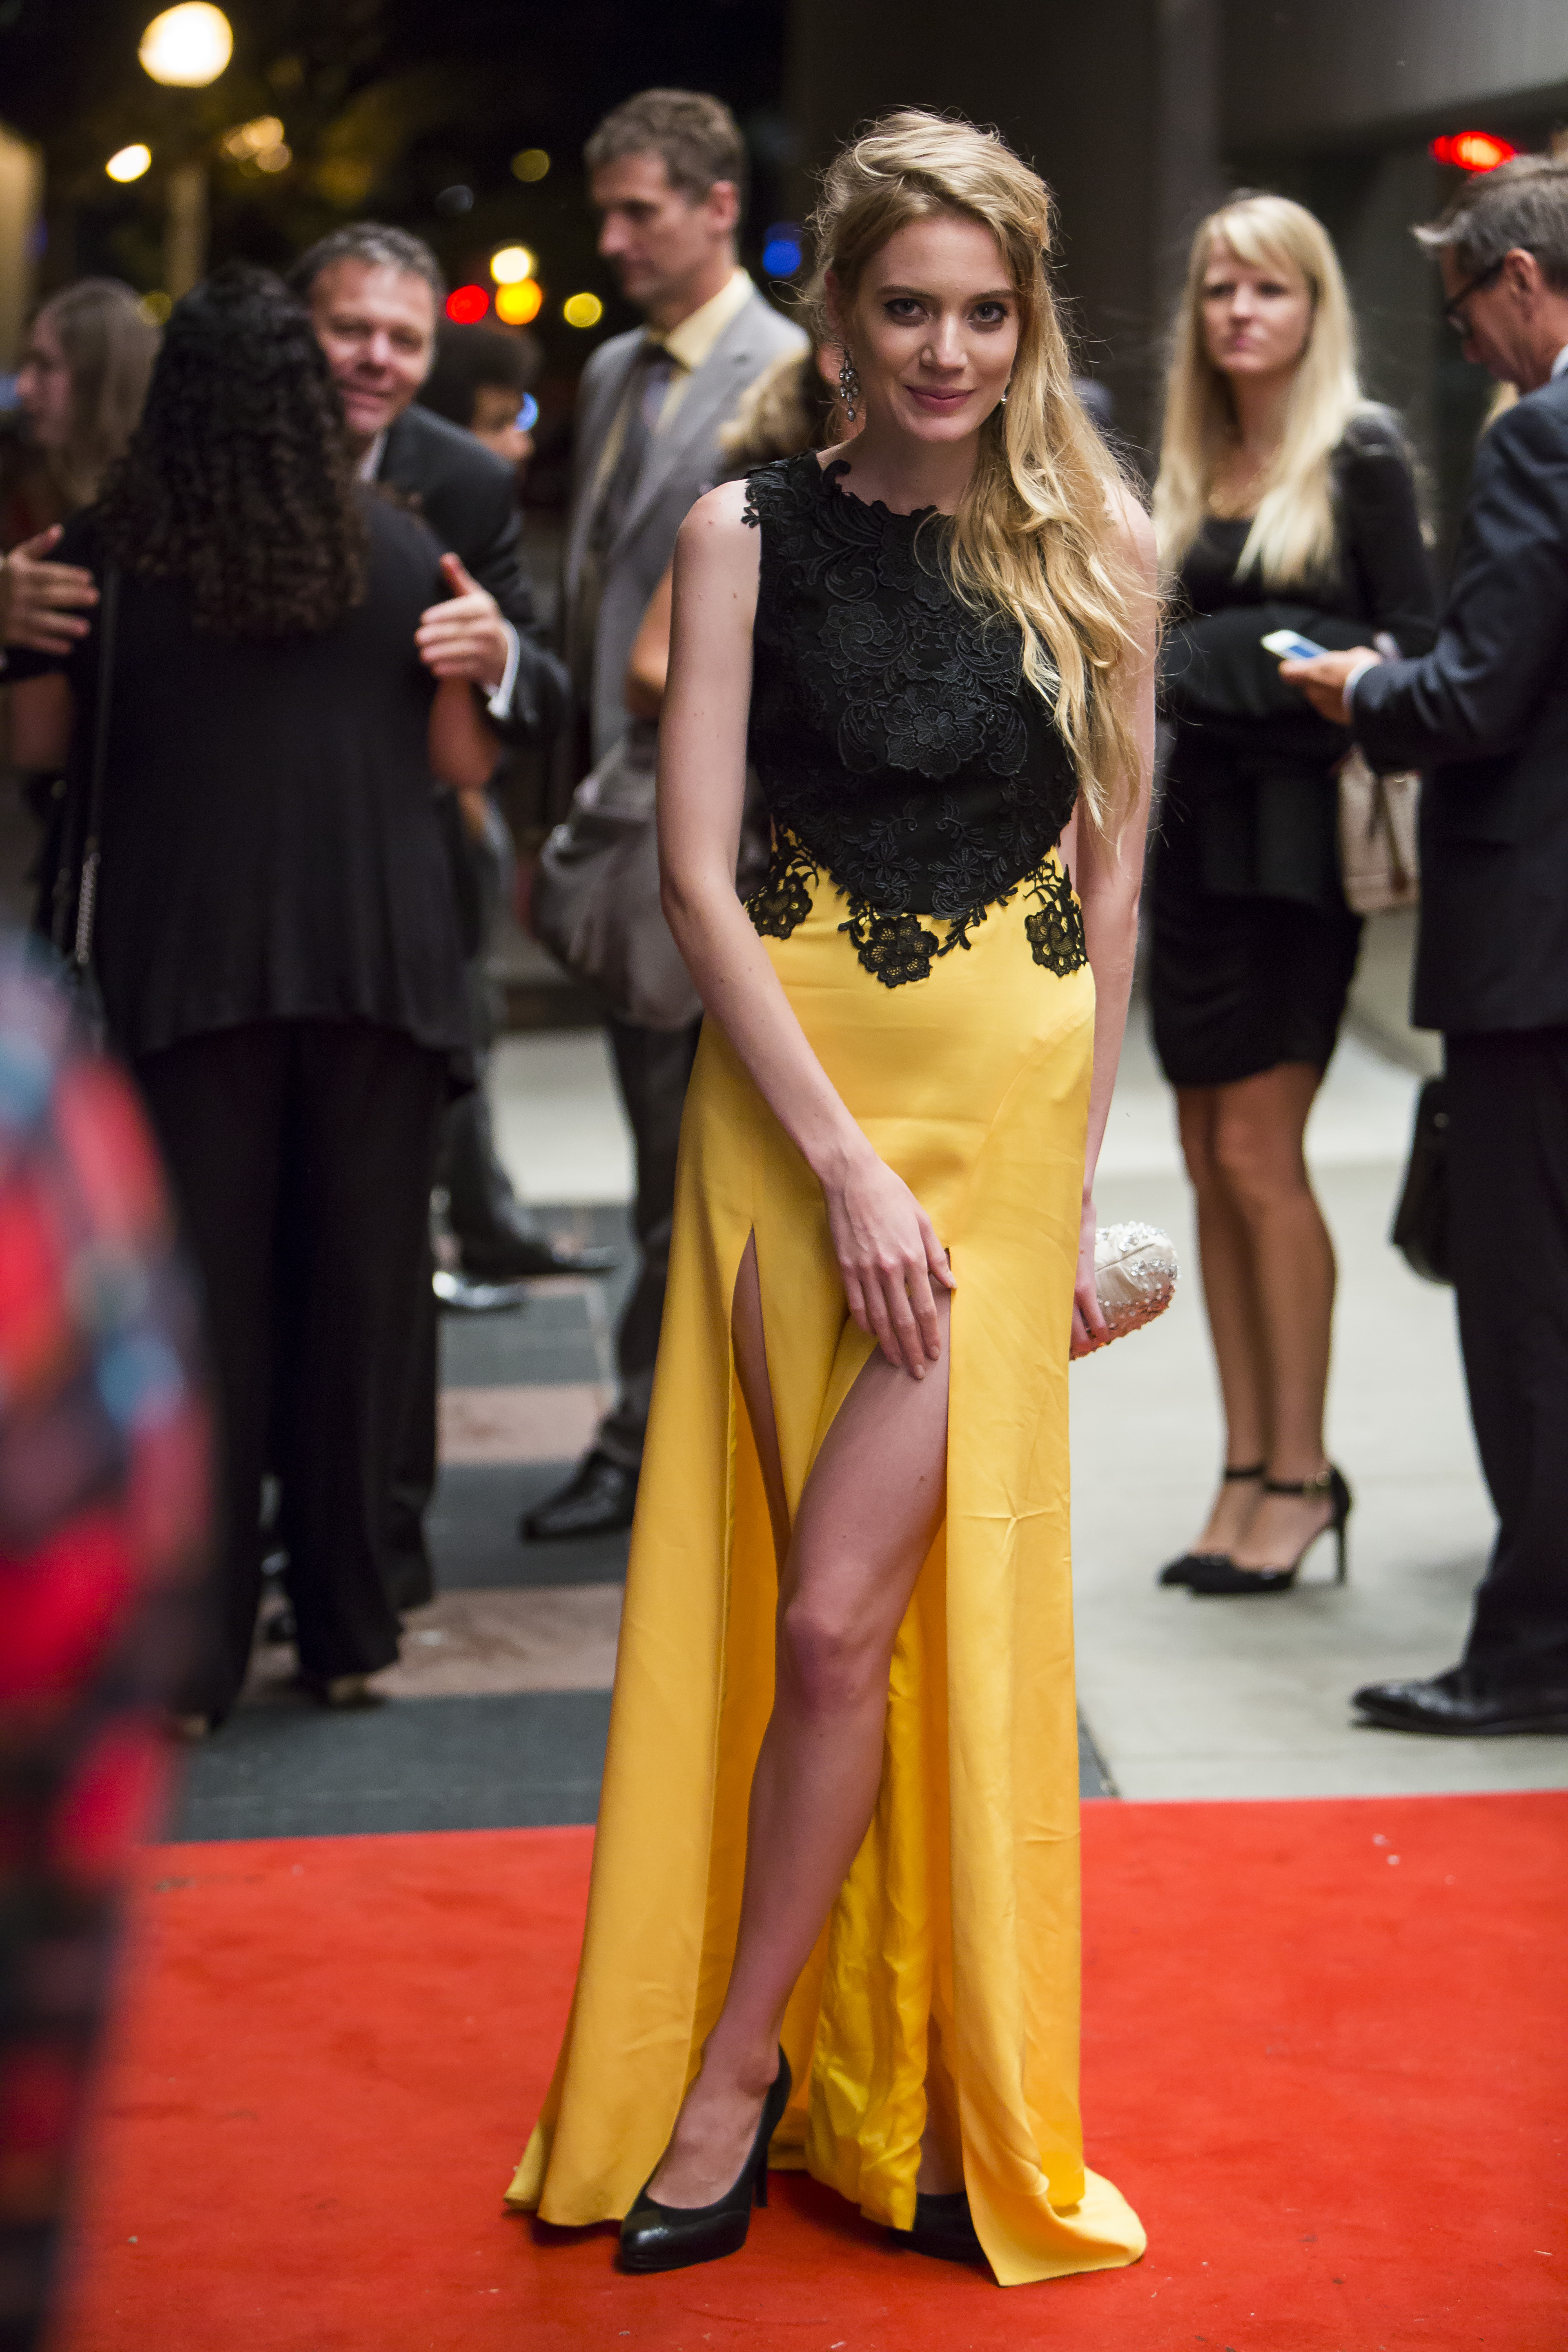 Clara Pasieka at the North American premiere of Maps to the Stars at TIFF